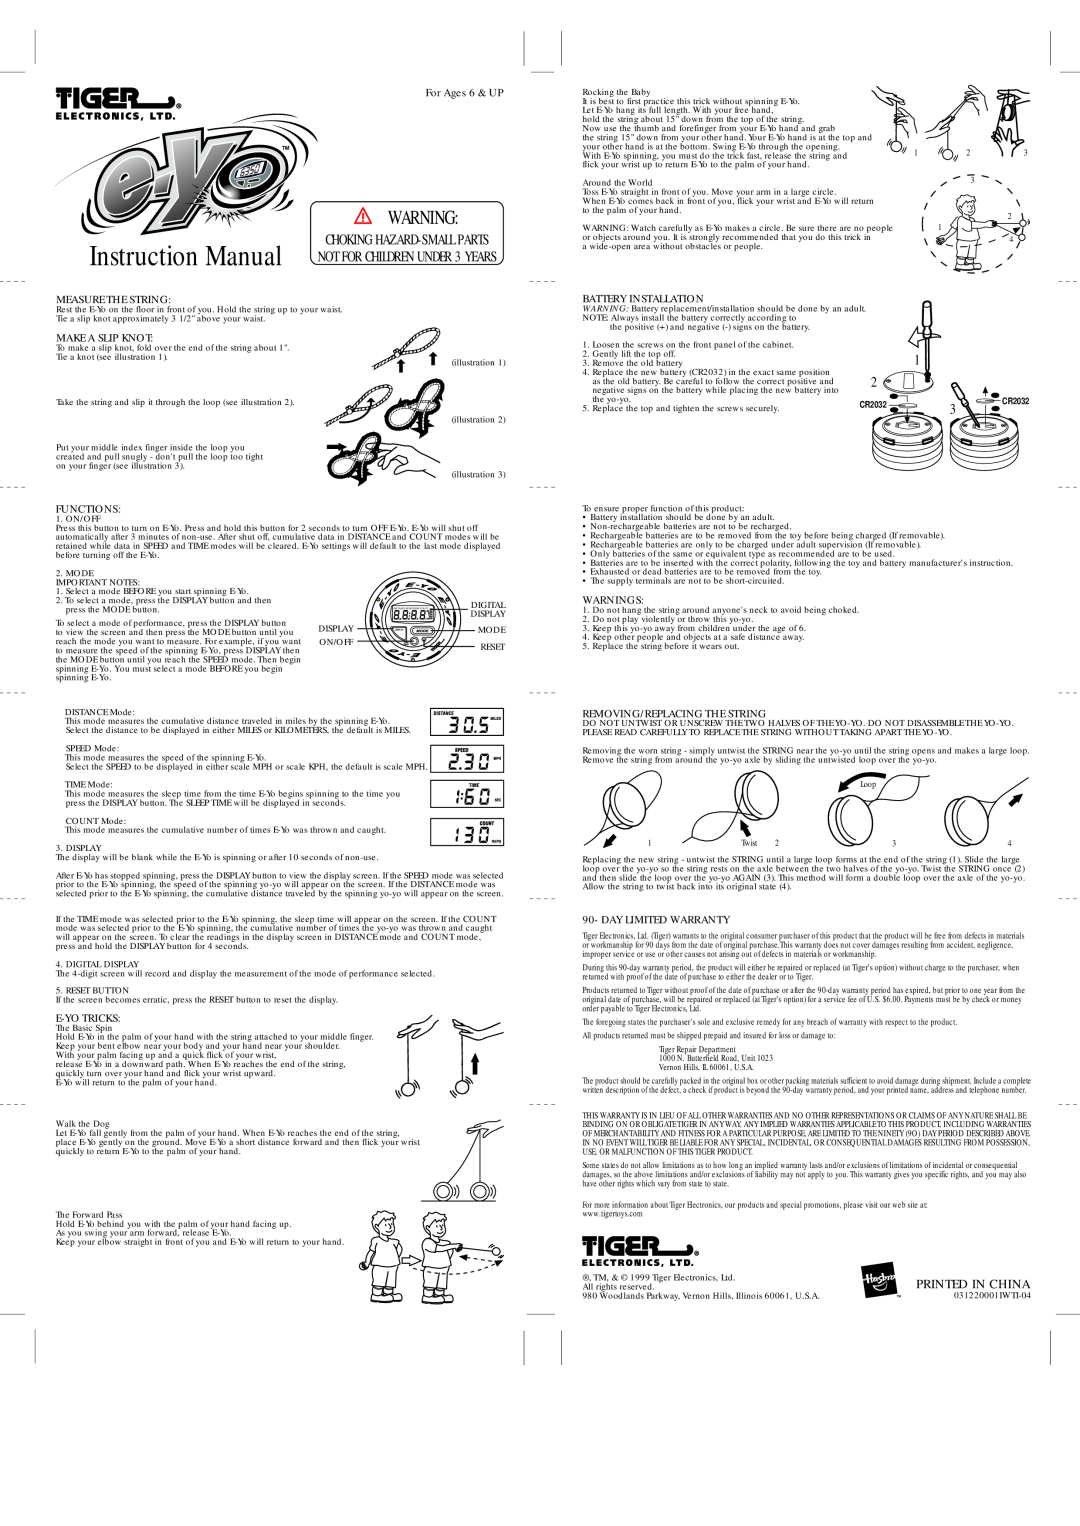 Tiger E-Yo instruction manual Instruction Manual, Printed In China, Measure The String, Battery Installation, Functions 